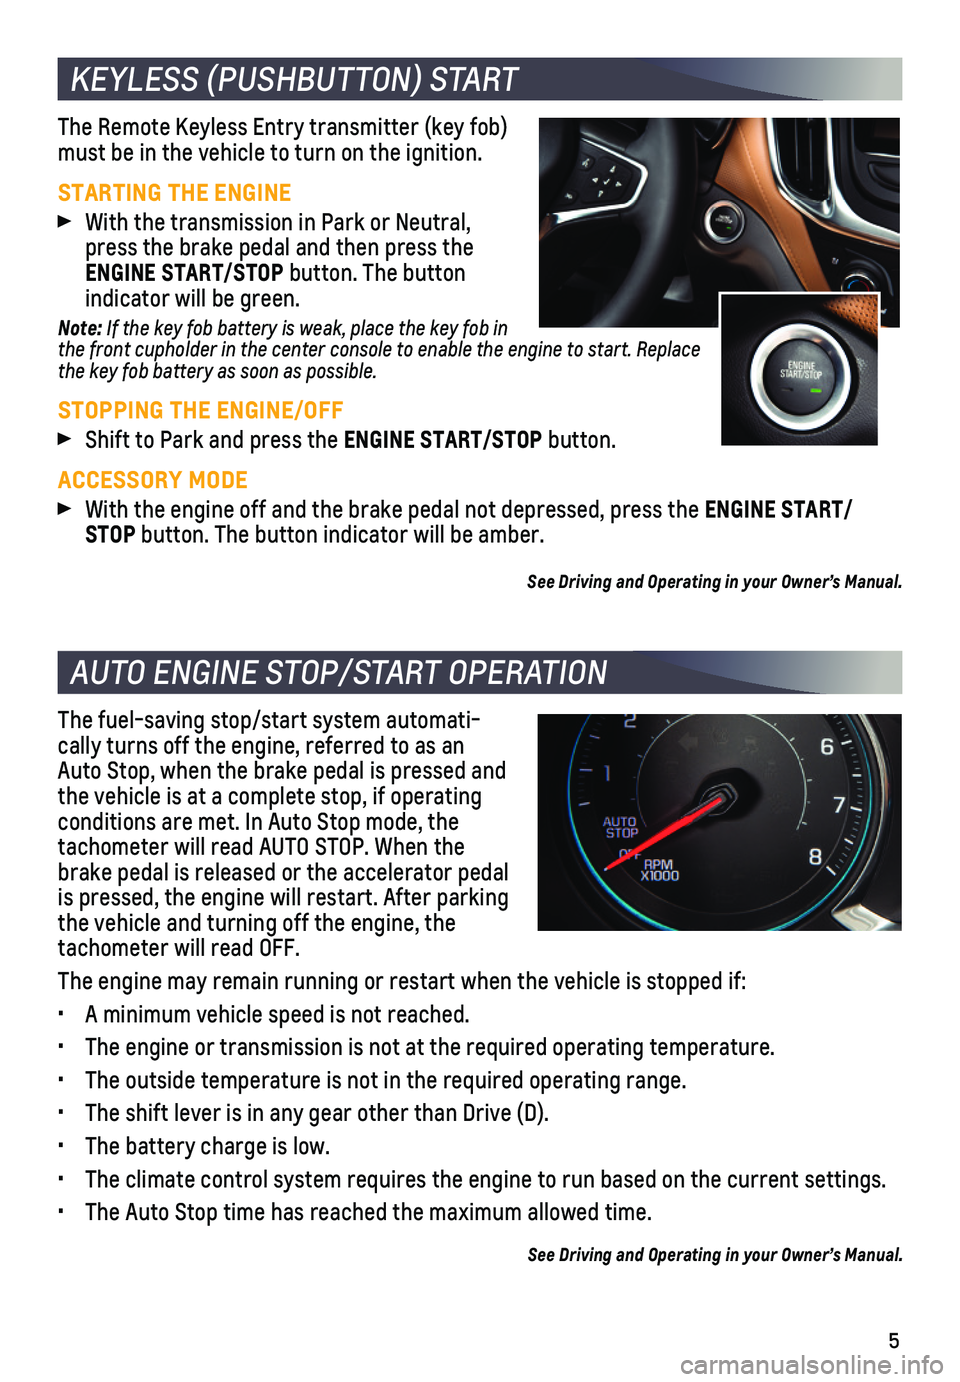 CHEVROLET EQUINOX 2021  Get To Know Guide 5
The Remote Keyless Entry transmitter (key fob) must be in the vehicle to turn on the ignition.
STARTING THE ENGINE With the transmission in Park or Neutral, press the brake pedal and then press the 